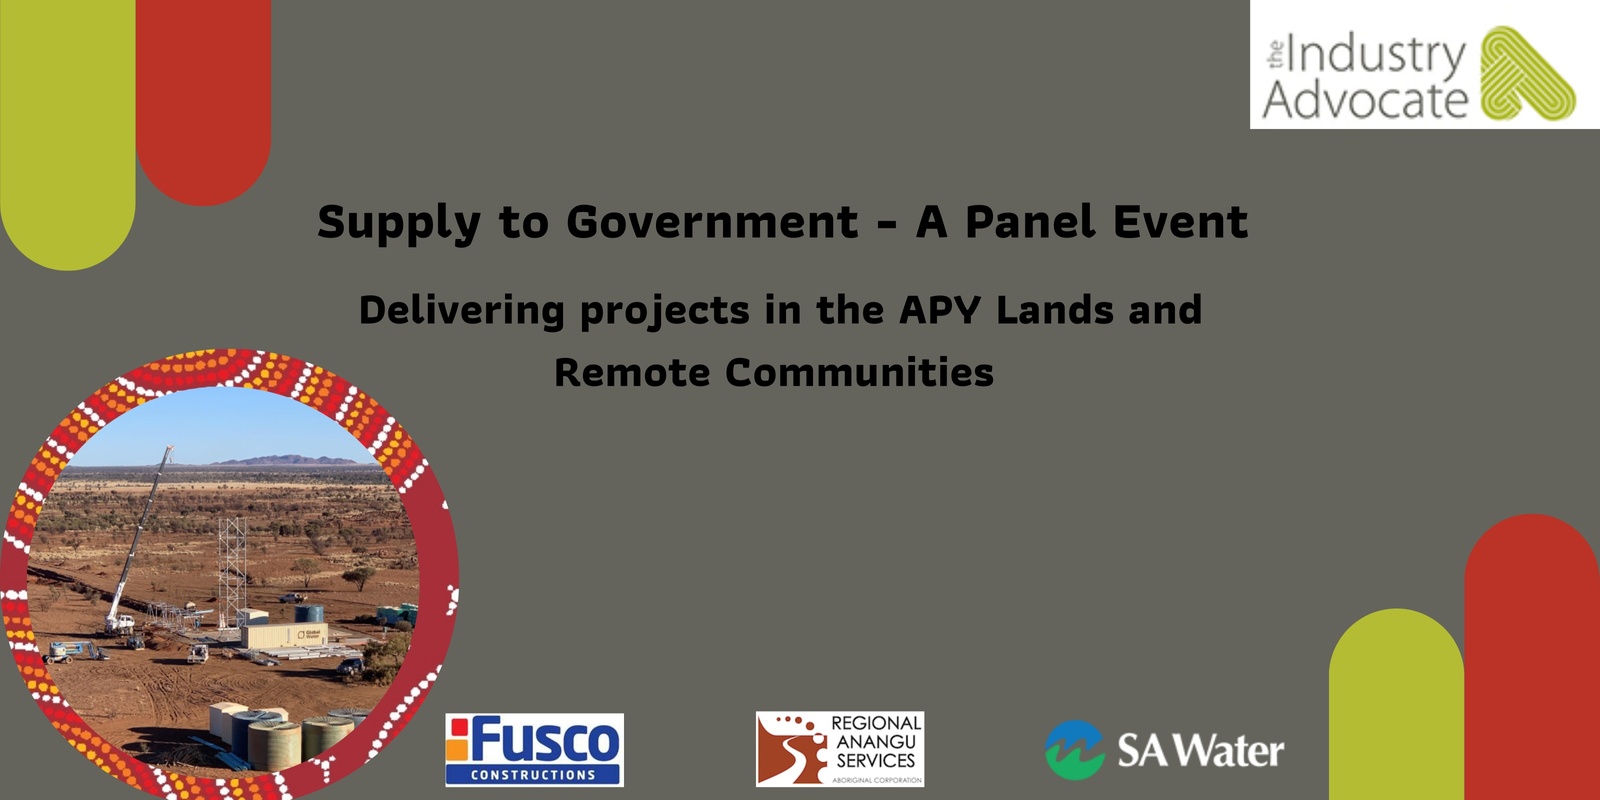 Banner image for Supply to Government - A Panel Event on delivering projects in the APY Lands and Remote Communities